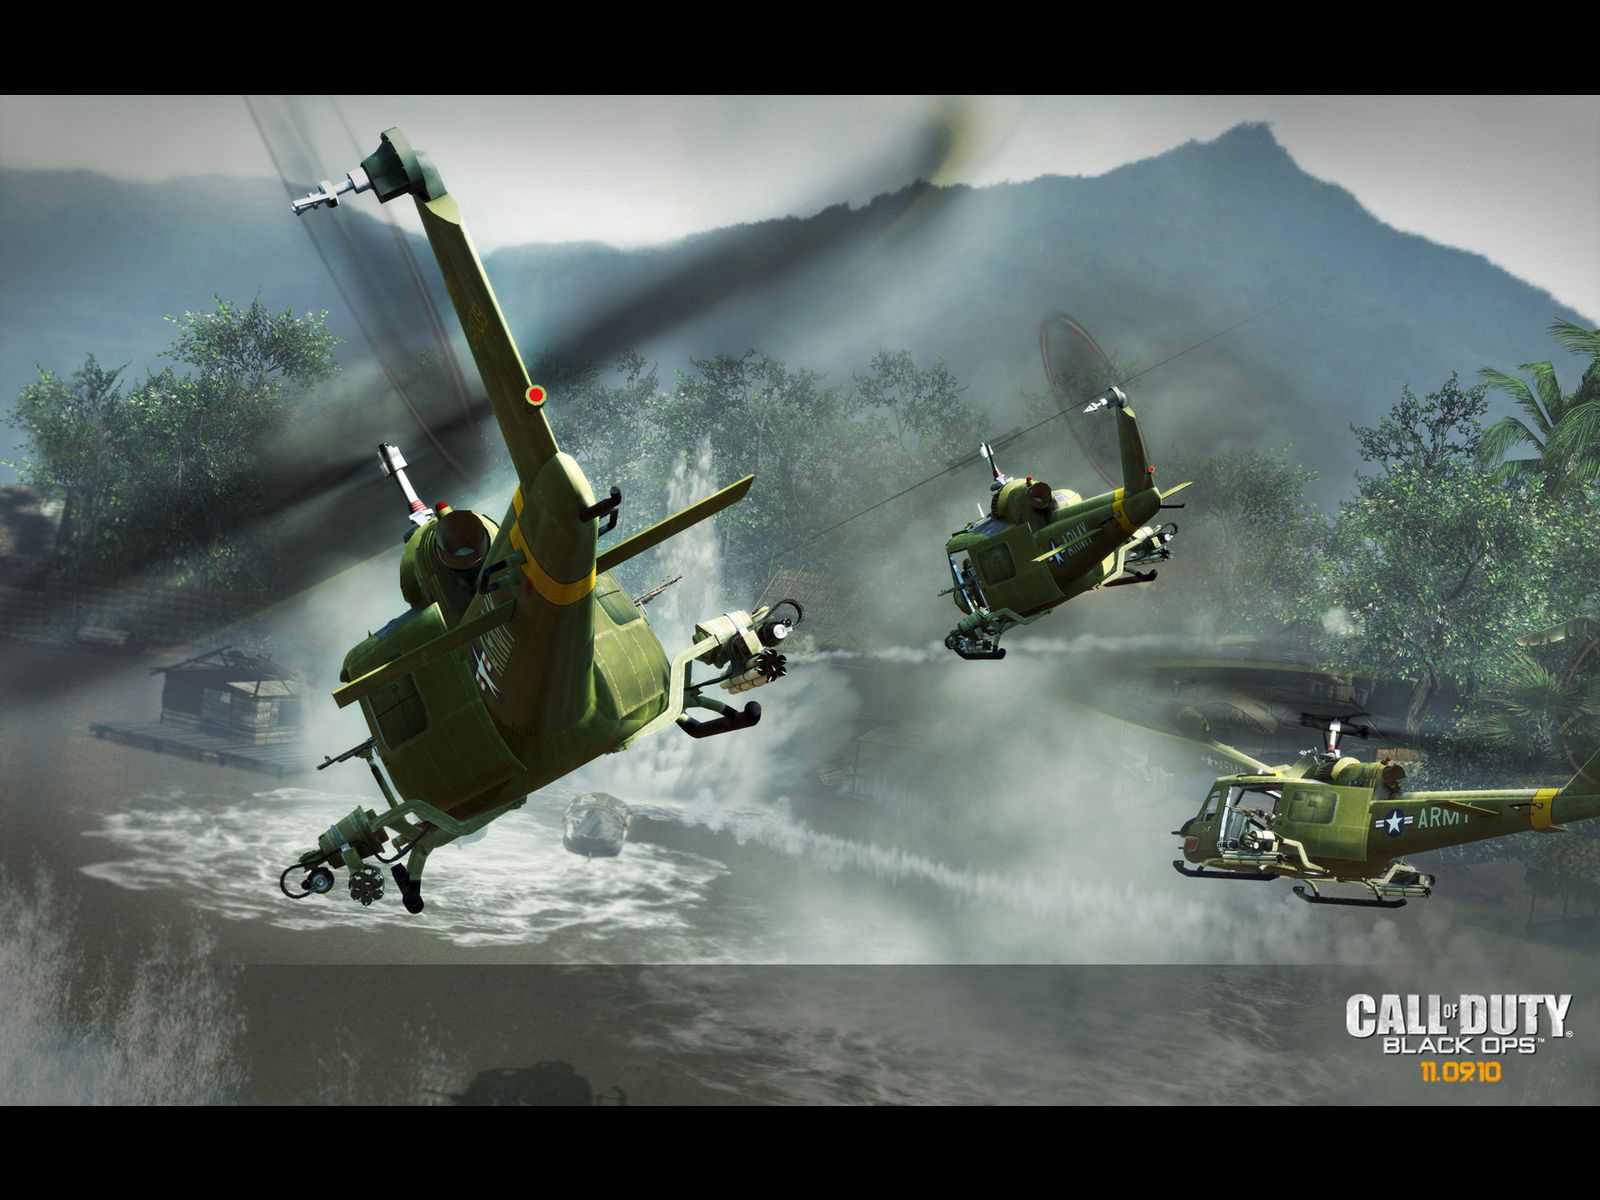 Huey Helicopter Wallpaper. Helicopter Army Wallpaper, Military Helicopter Wallpaper and Helicopter Wallpaper